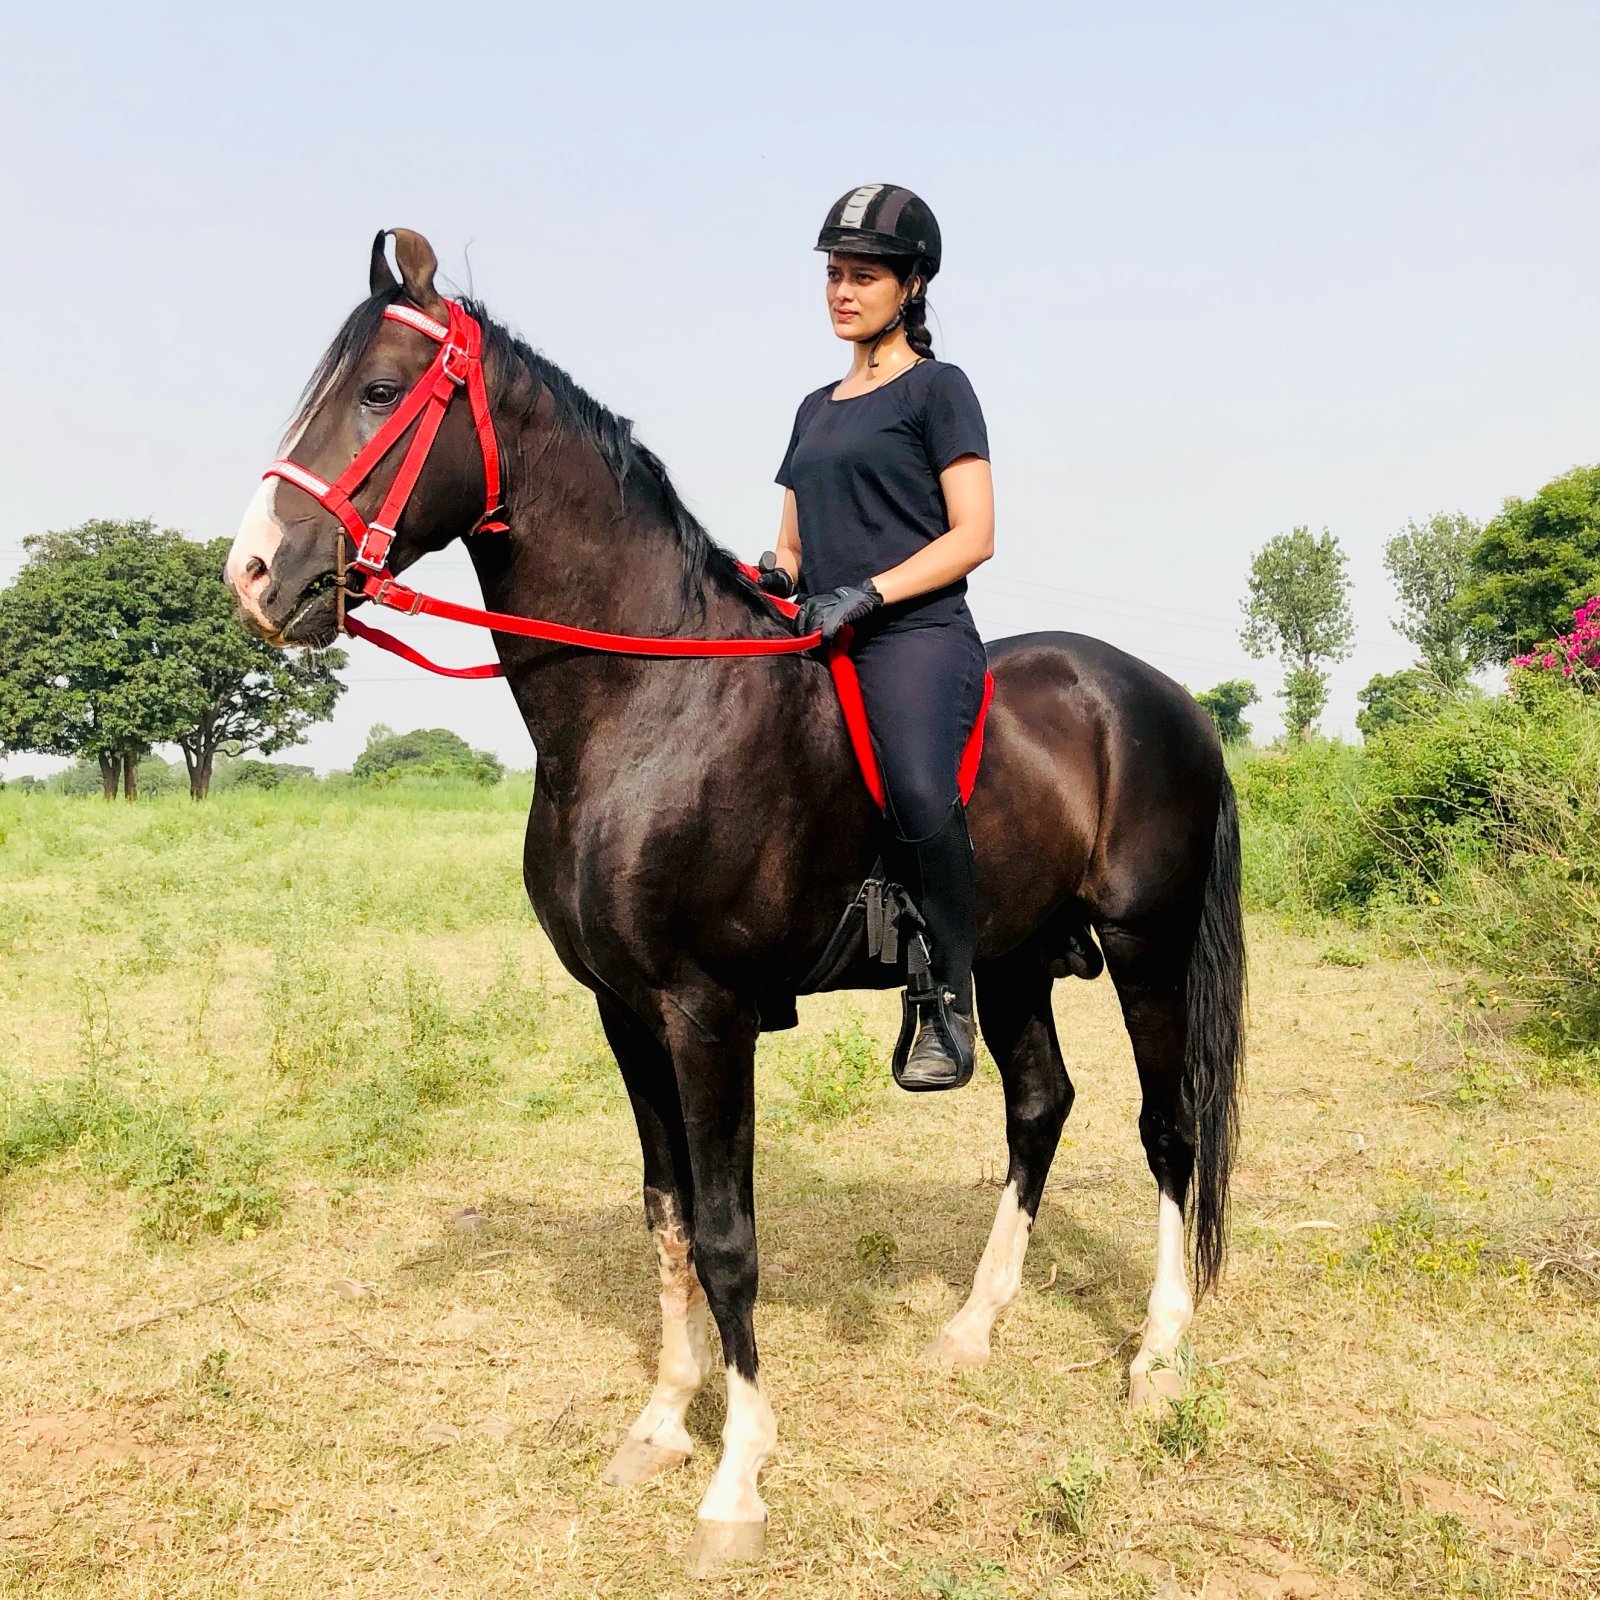 Bollywood Actress & Equestrian, Preeti Verma, Recognized by India Book of Records for Exceptional Achievement in Thar Desert Riding